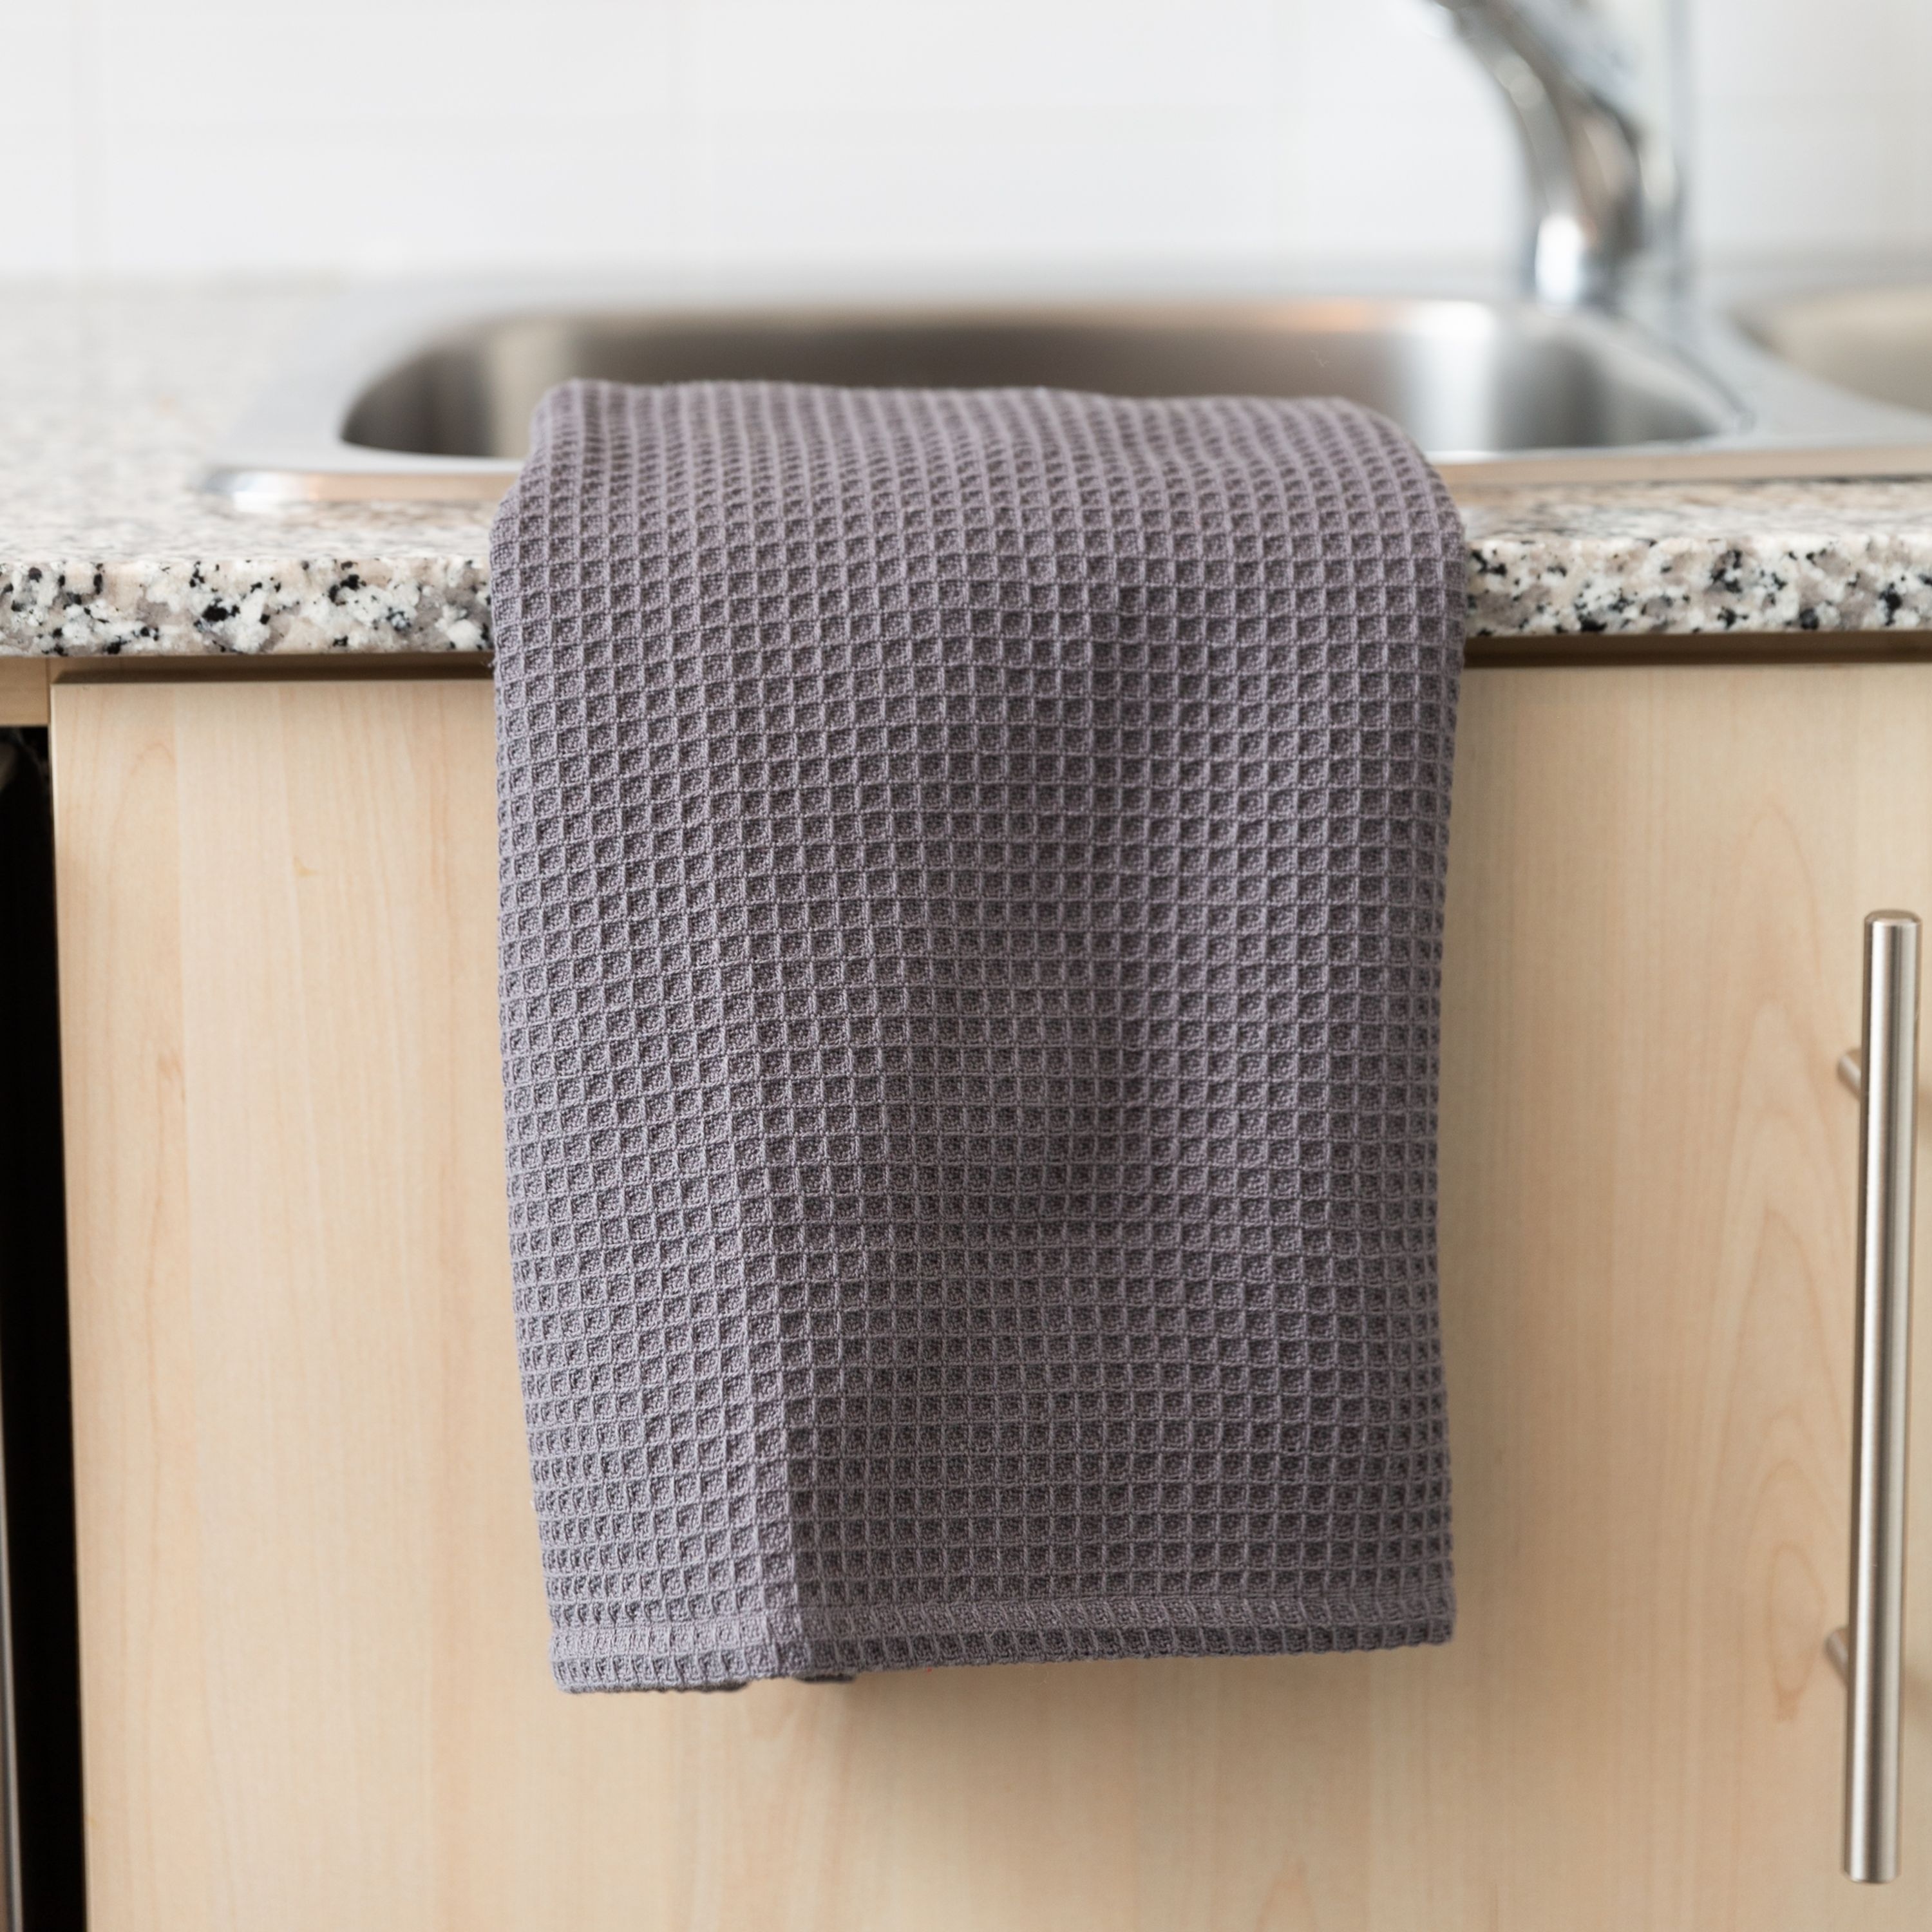 https://ak1.ostkcdn.com/images/products/is/images/direct/6e3db4b4addf60be83446afab41f7a30e0a7d8b3/Fabstyles-Broadway-Waffle-Cotton-Kitchen-Towels.jpg